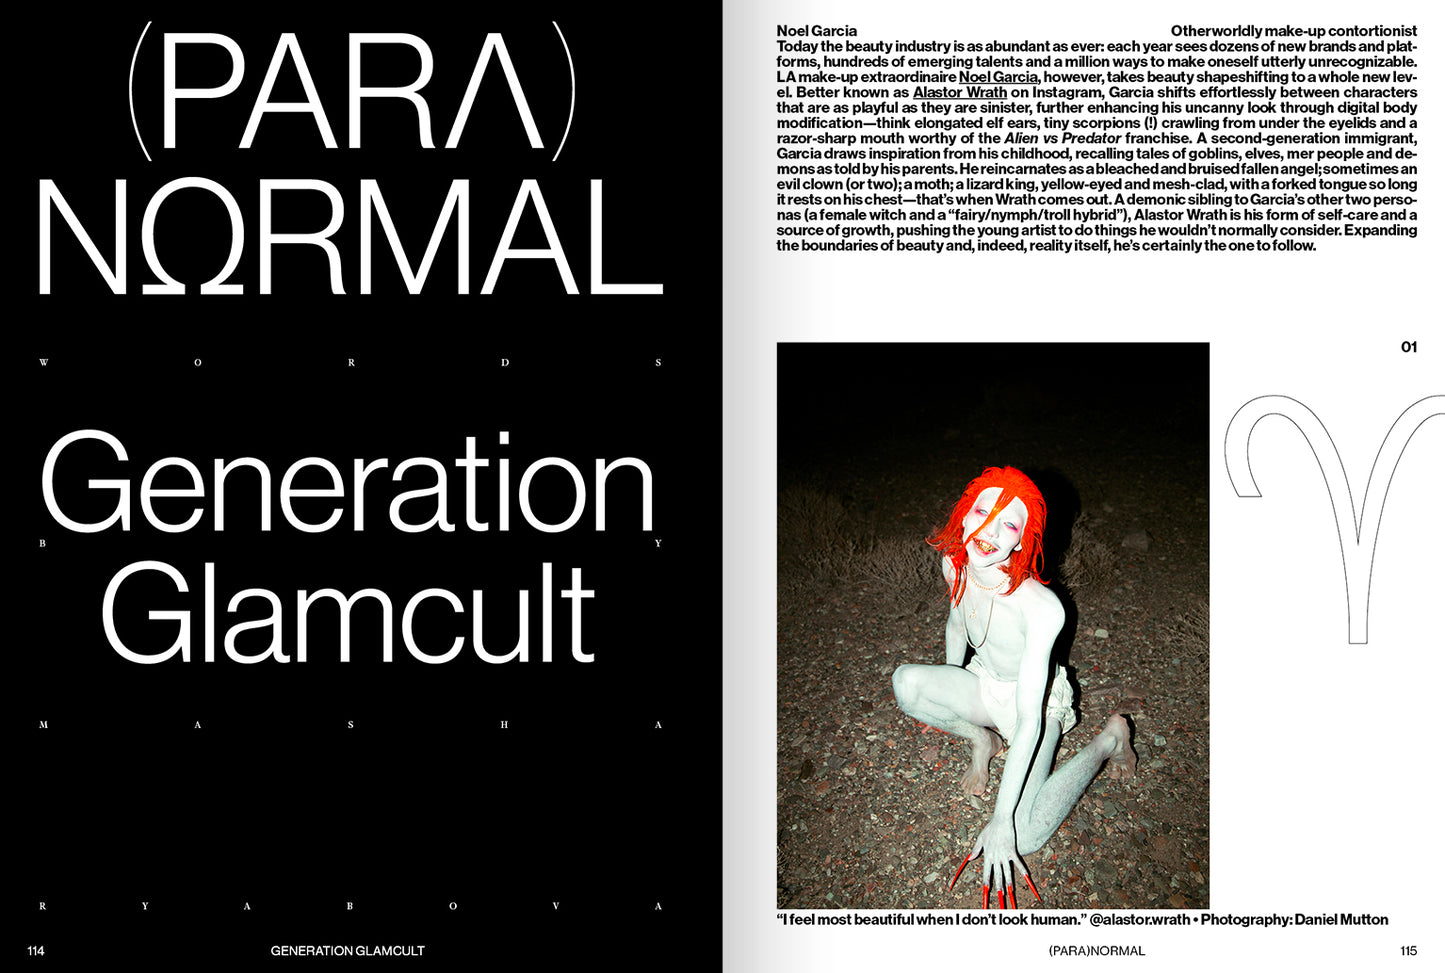 Glamcult #132 THE (PARA)NORMAL ISSUE